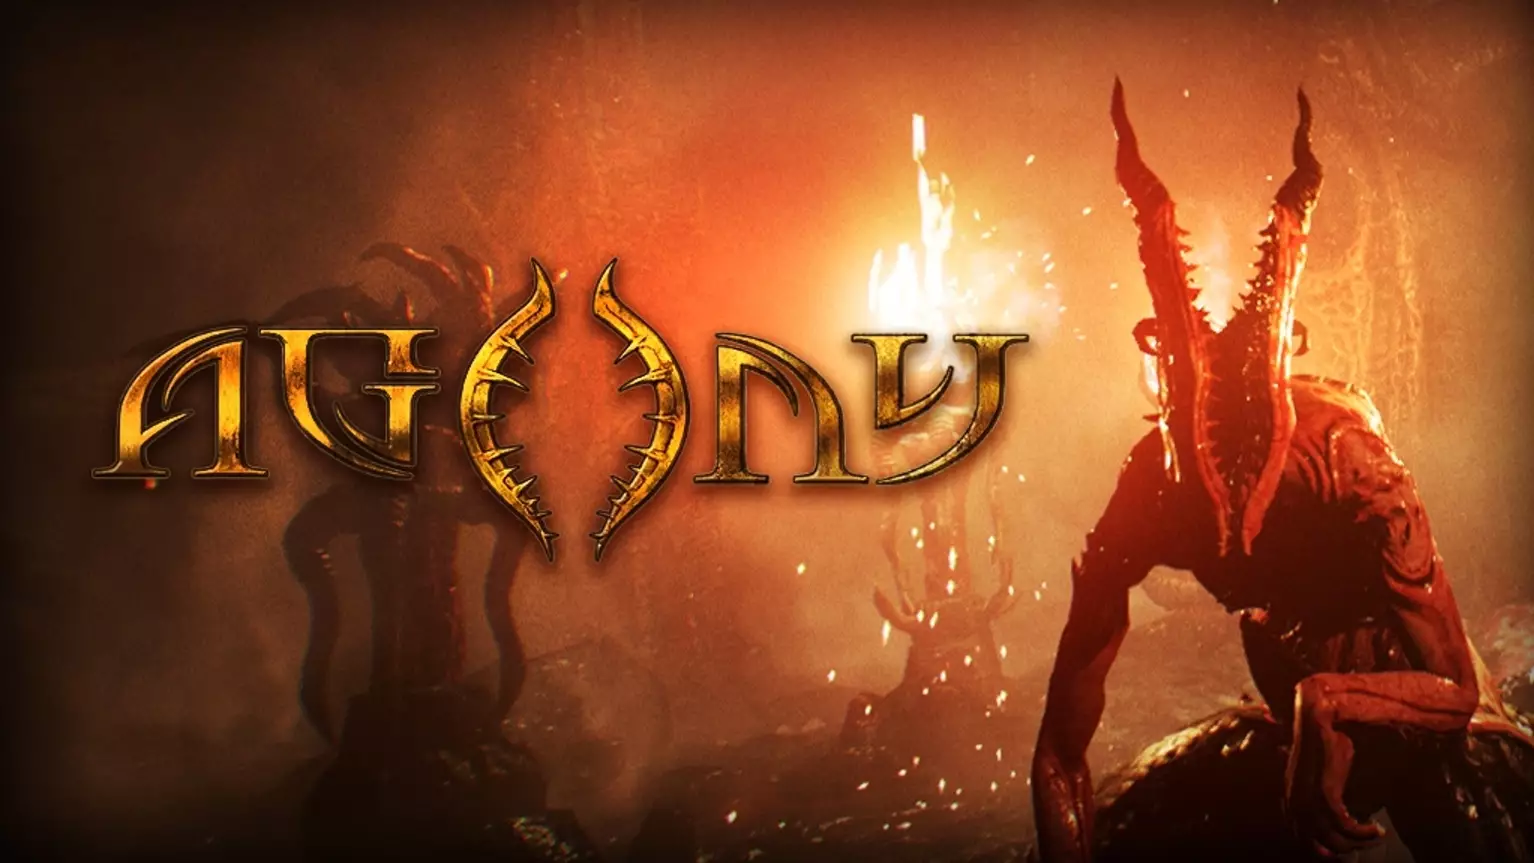 Hell-Based Horror Video Game 'Agony' To Be Released In May 2018